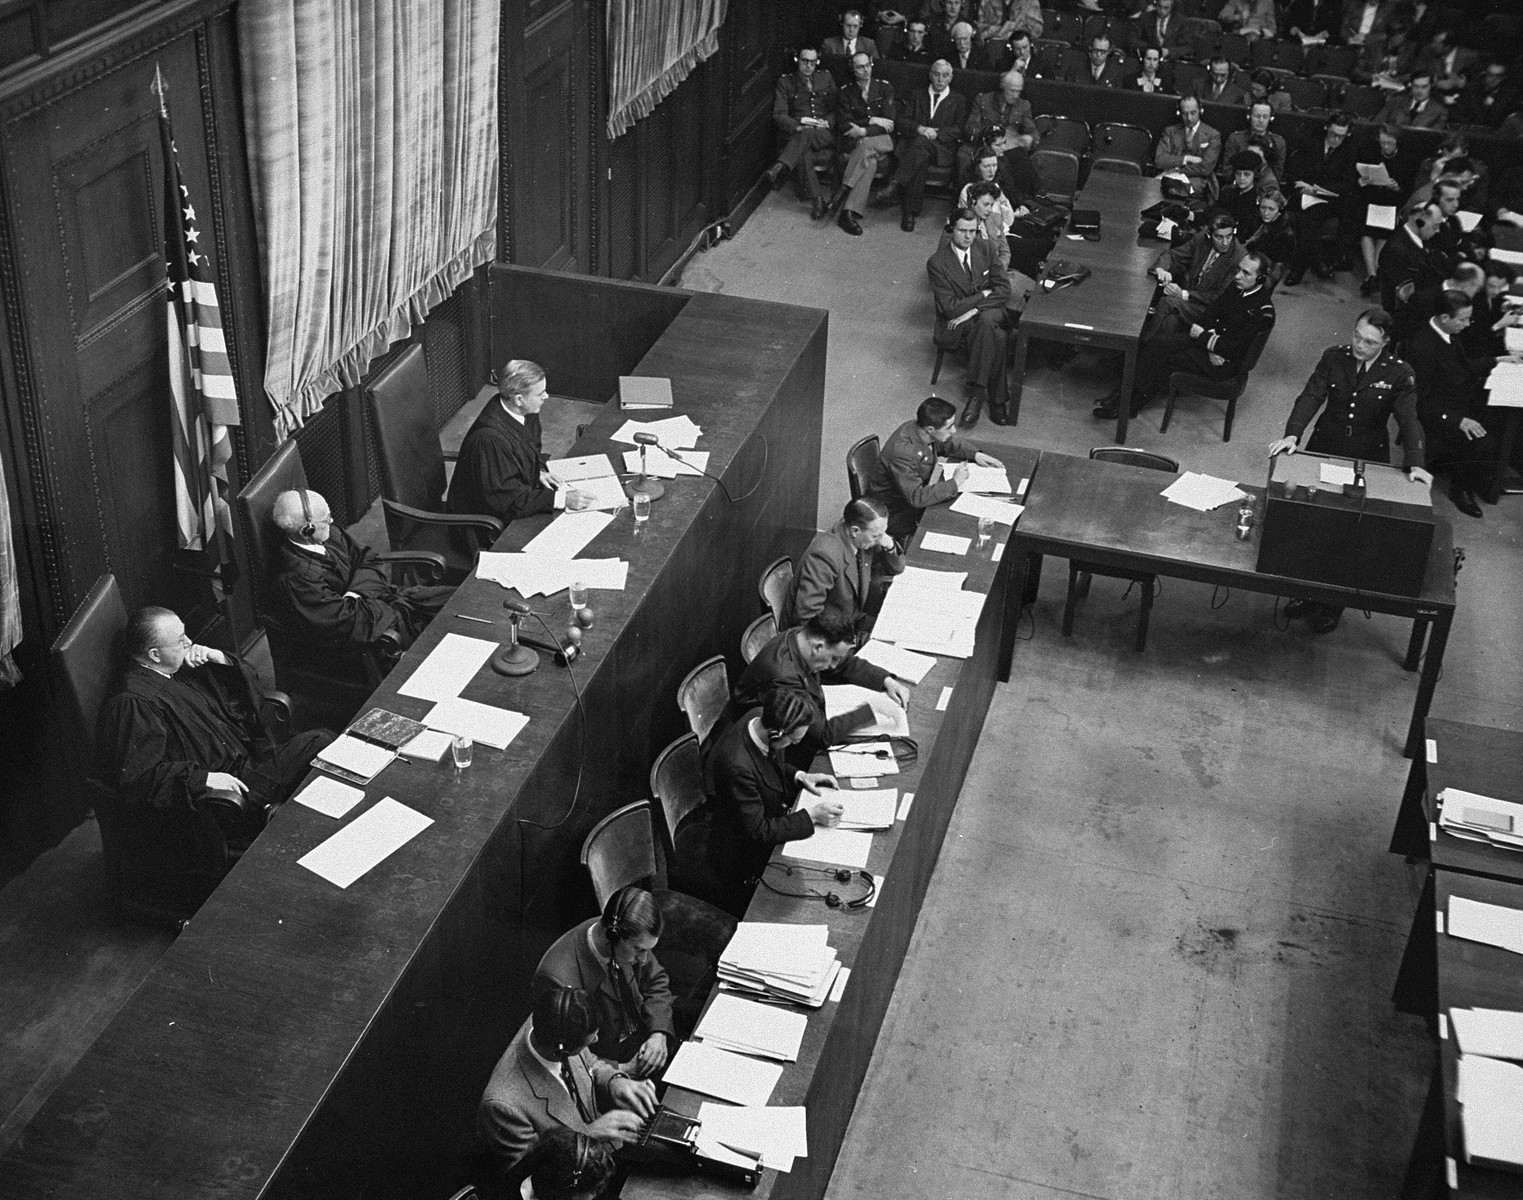 Brigadier General Telford Taylor, the U.S. Chief Counsel, delivers the prosecution's opening statement during the Ministries Trial.